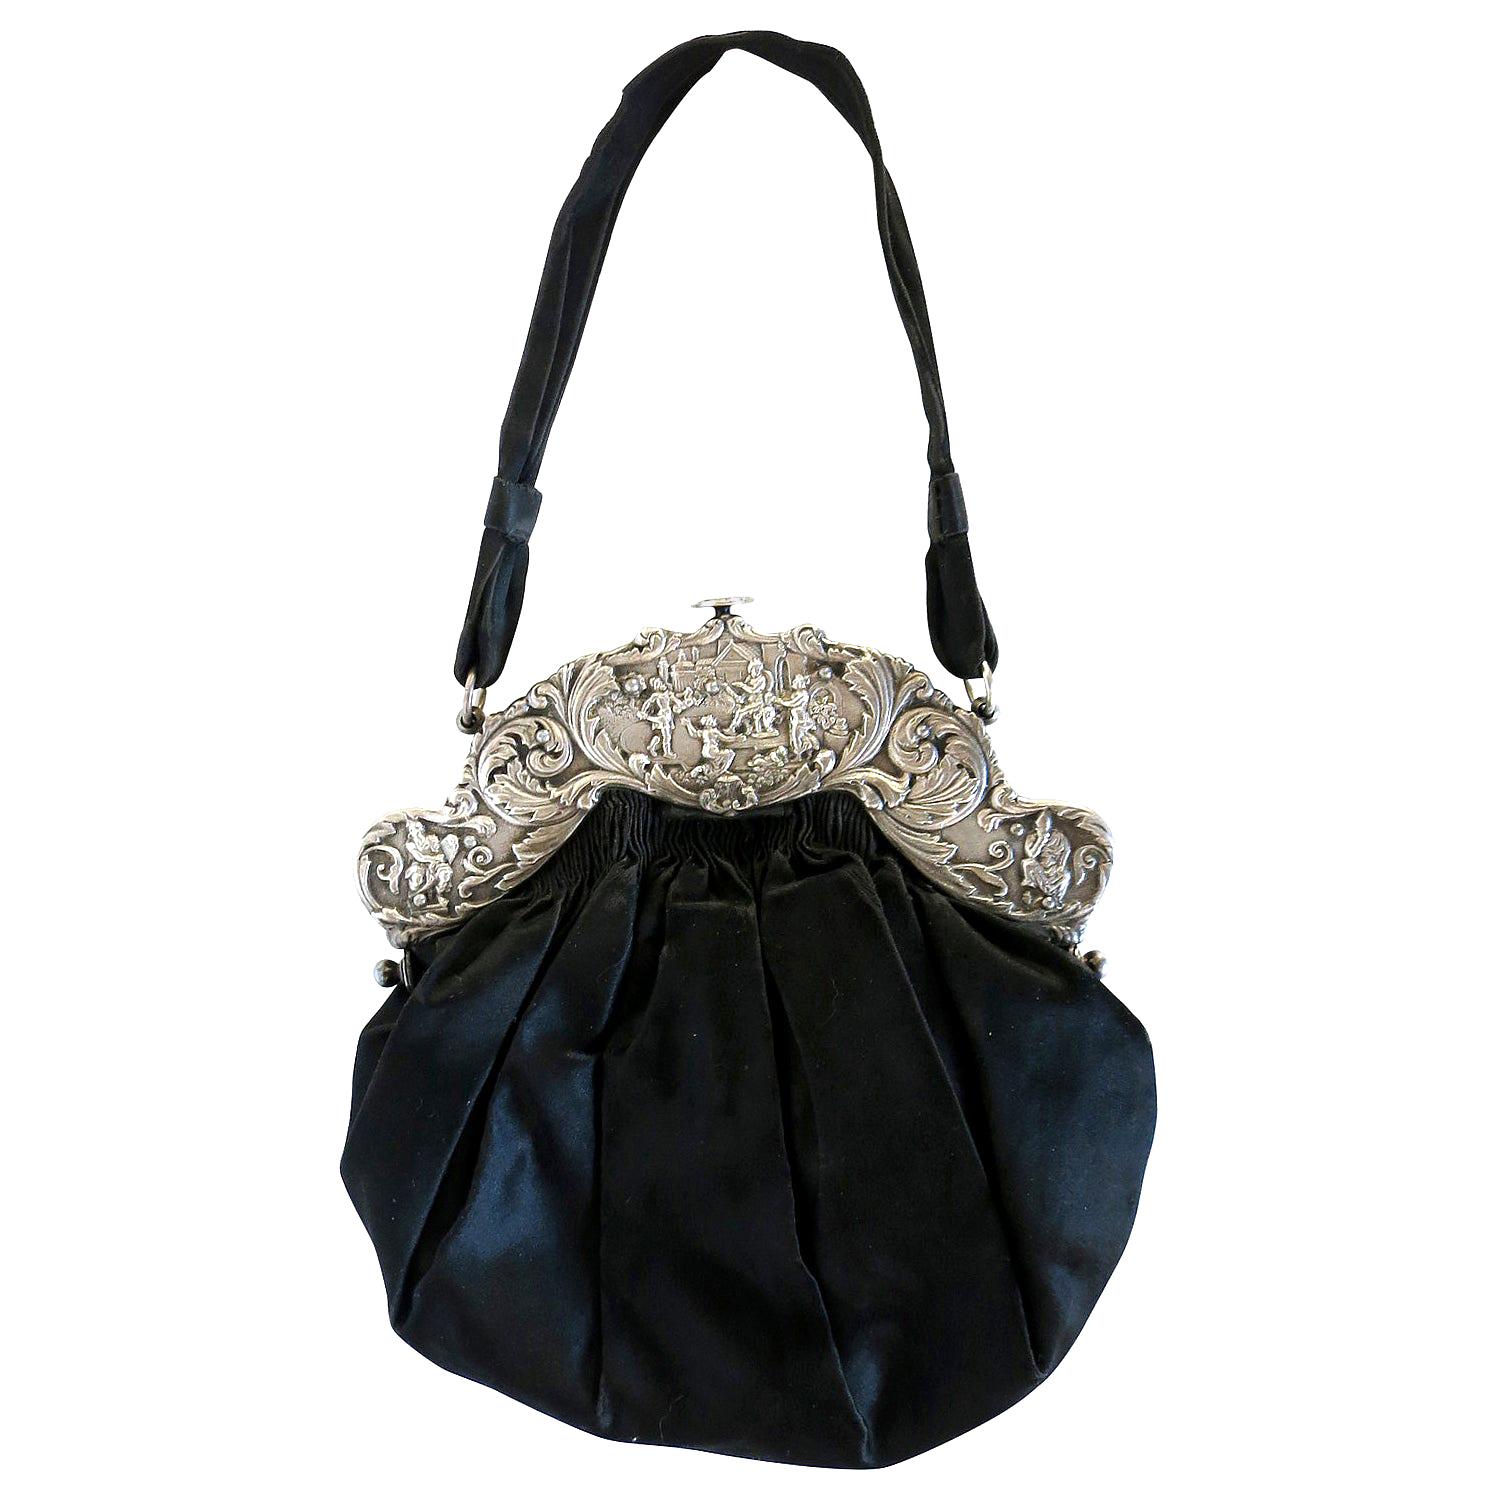 Victorian Hand Bag with Large Decorative Sterling Silver Clasp For Sale